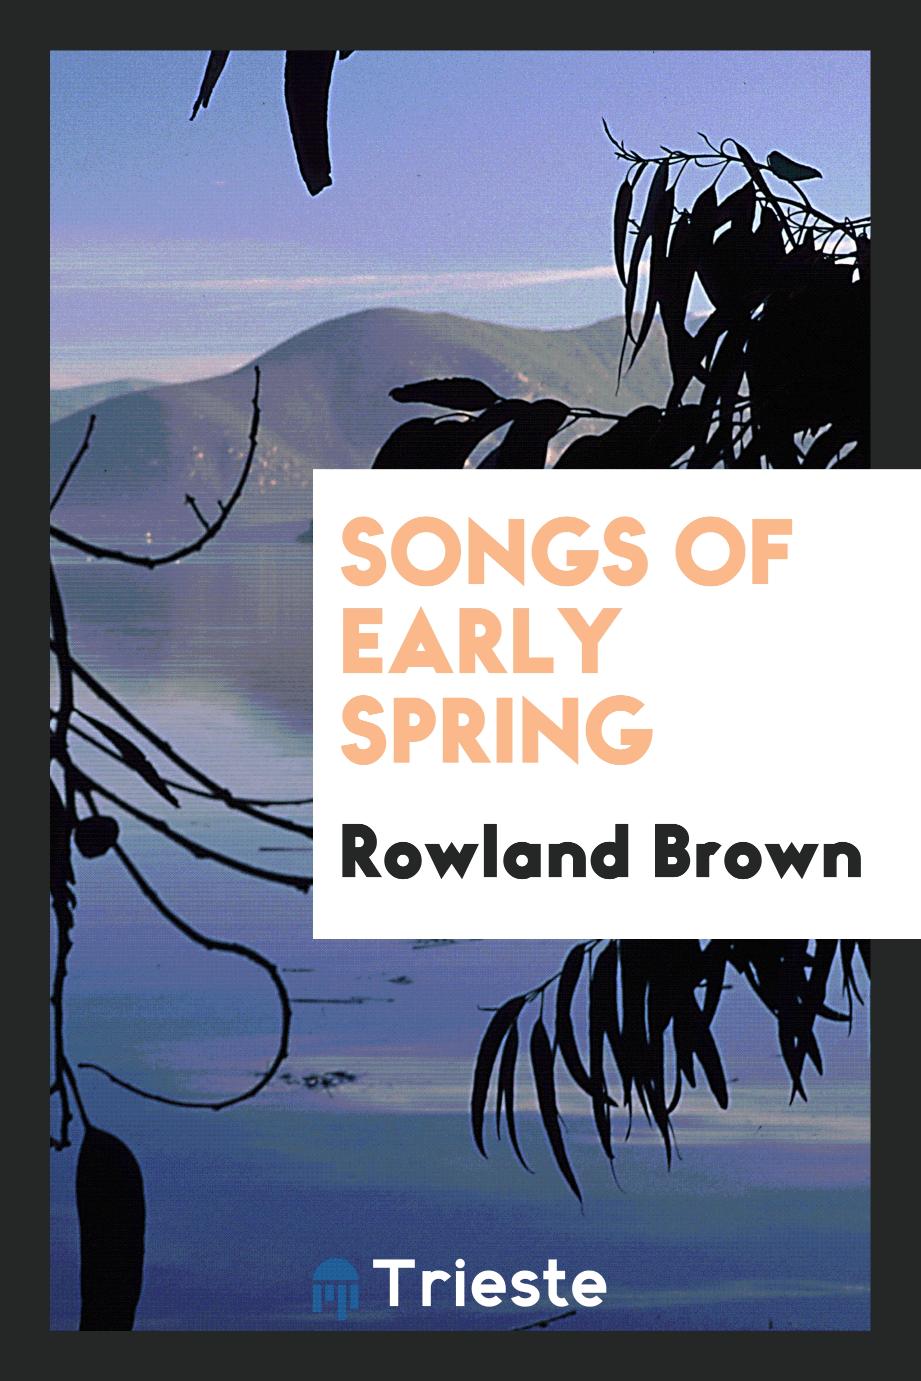 Songs of early spring